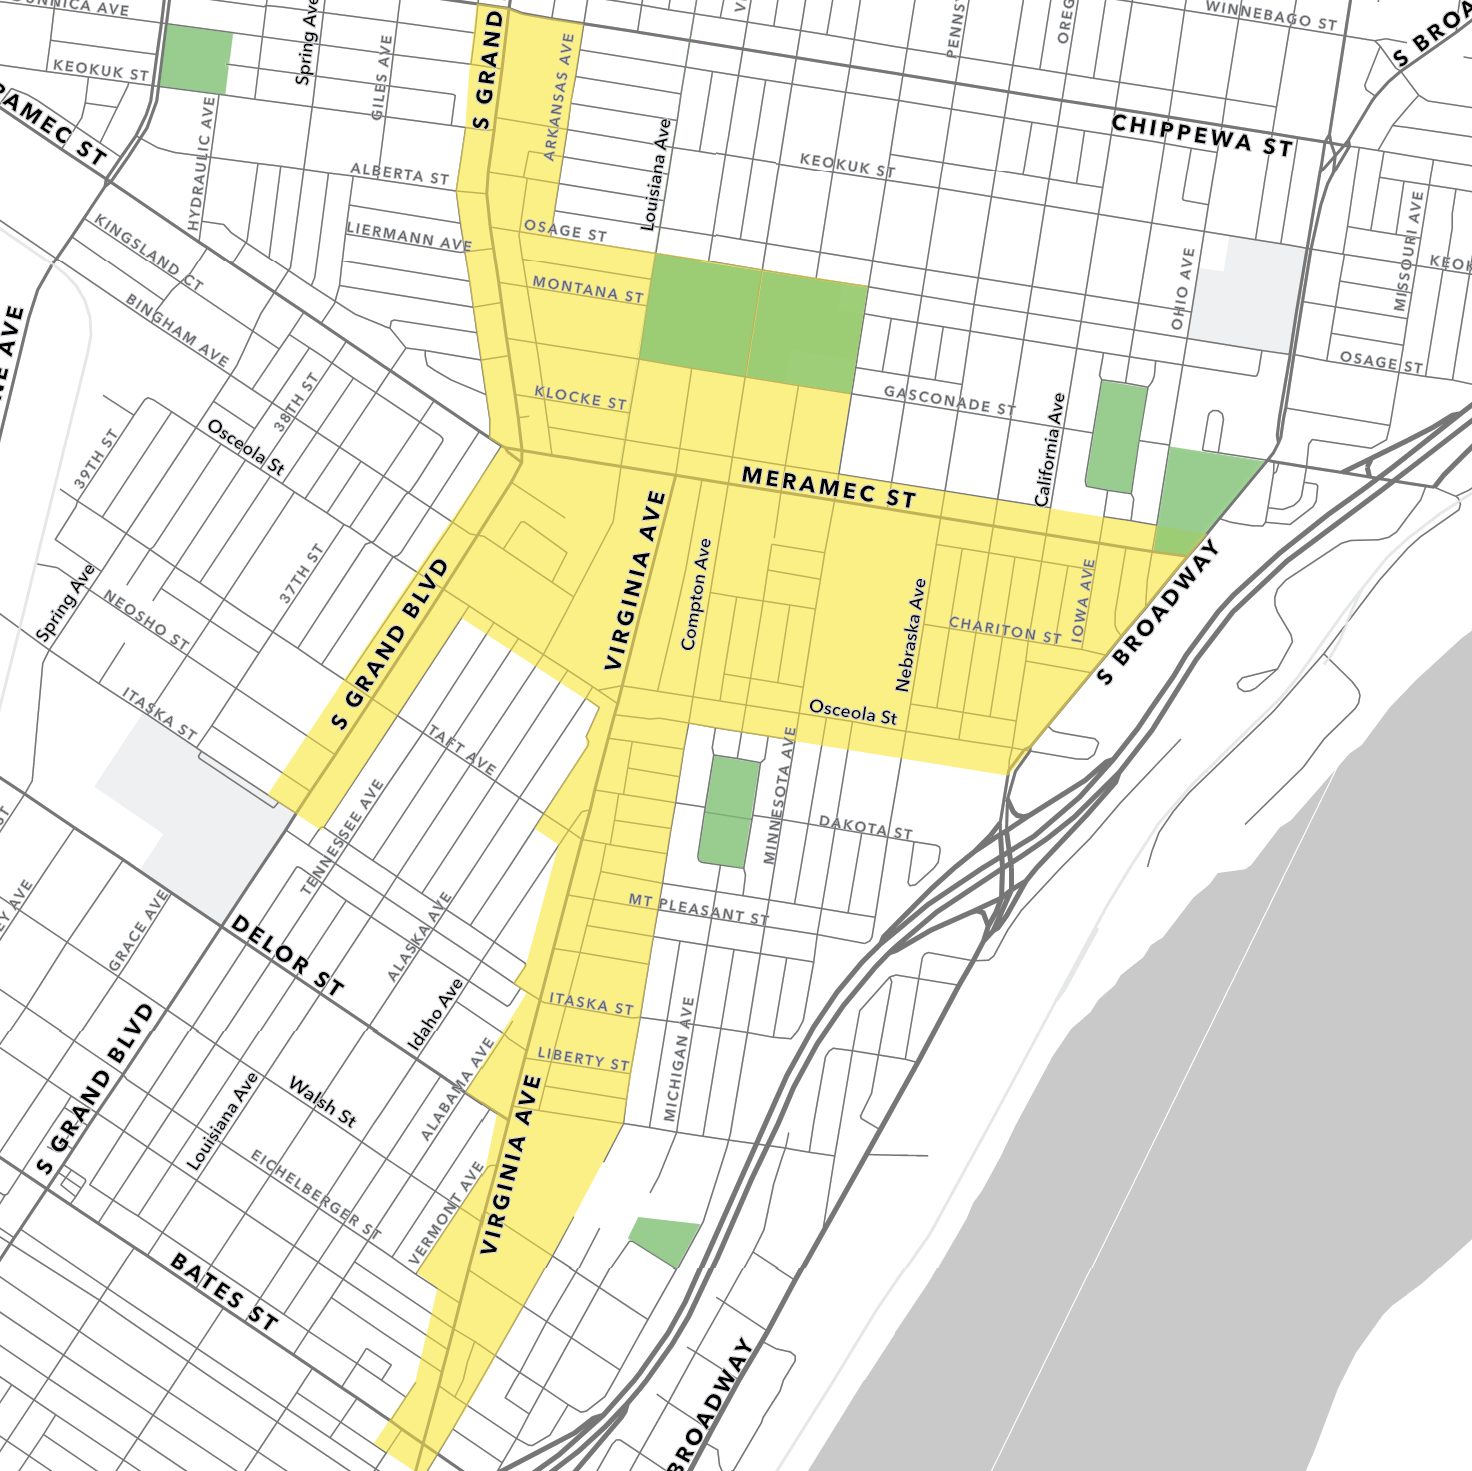 The UrbanMain planning area in Dutchtown, St. Louis, MO.